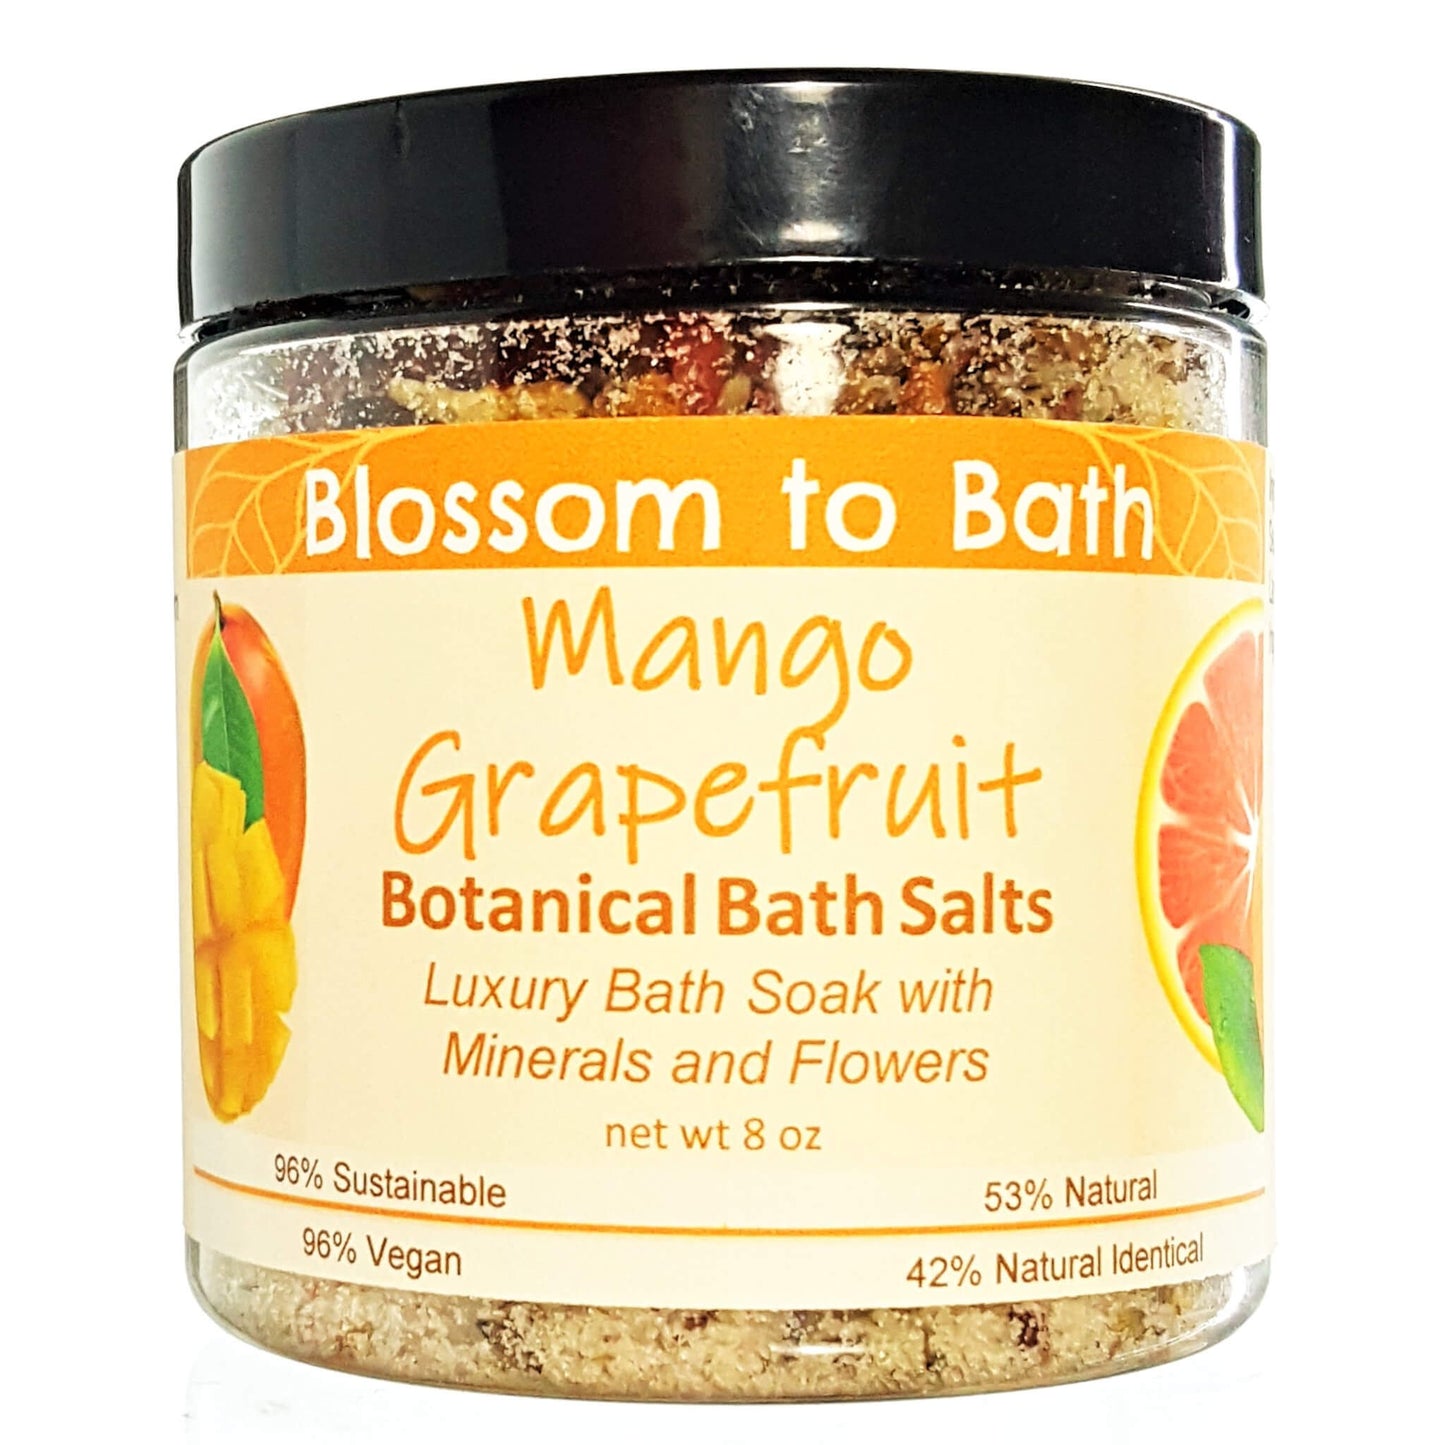 Buy Blossom to Bath Mango Grapefruit Botanical Bath Salts from Flowersong Soap Studio.  A hand selected variety of skin loving botanicals and mineral rich salts for a unique, luxurious soaking experience  Exotic tropical fruits in a powdery puff of sophisticated freshness.